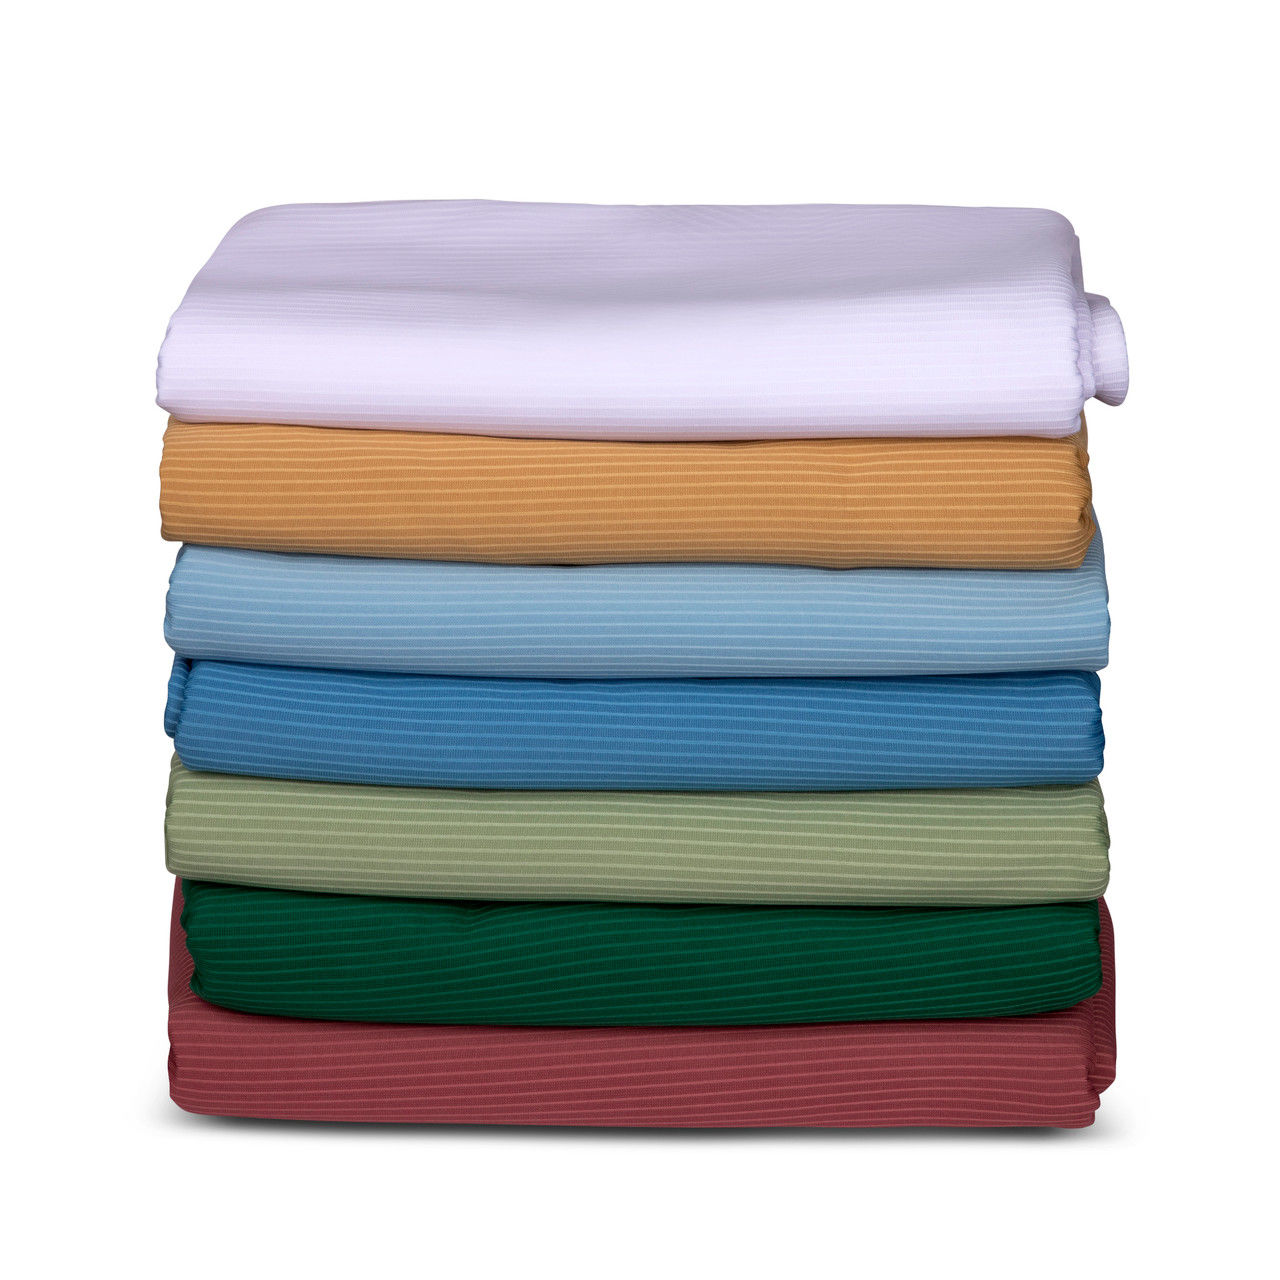 Which product line does the Ribcord Bedspread Twin belong to?